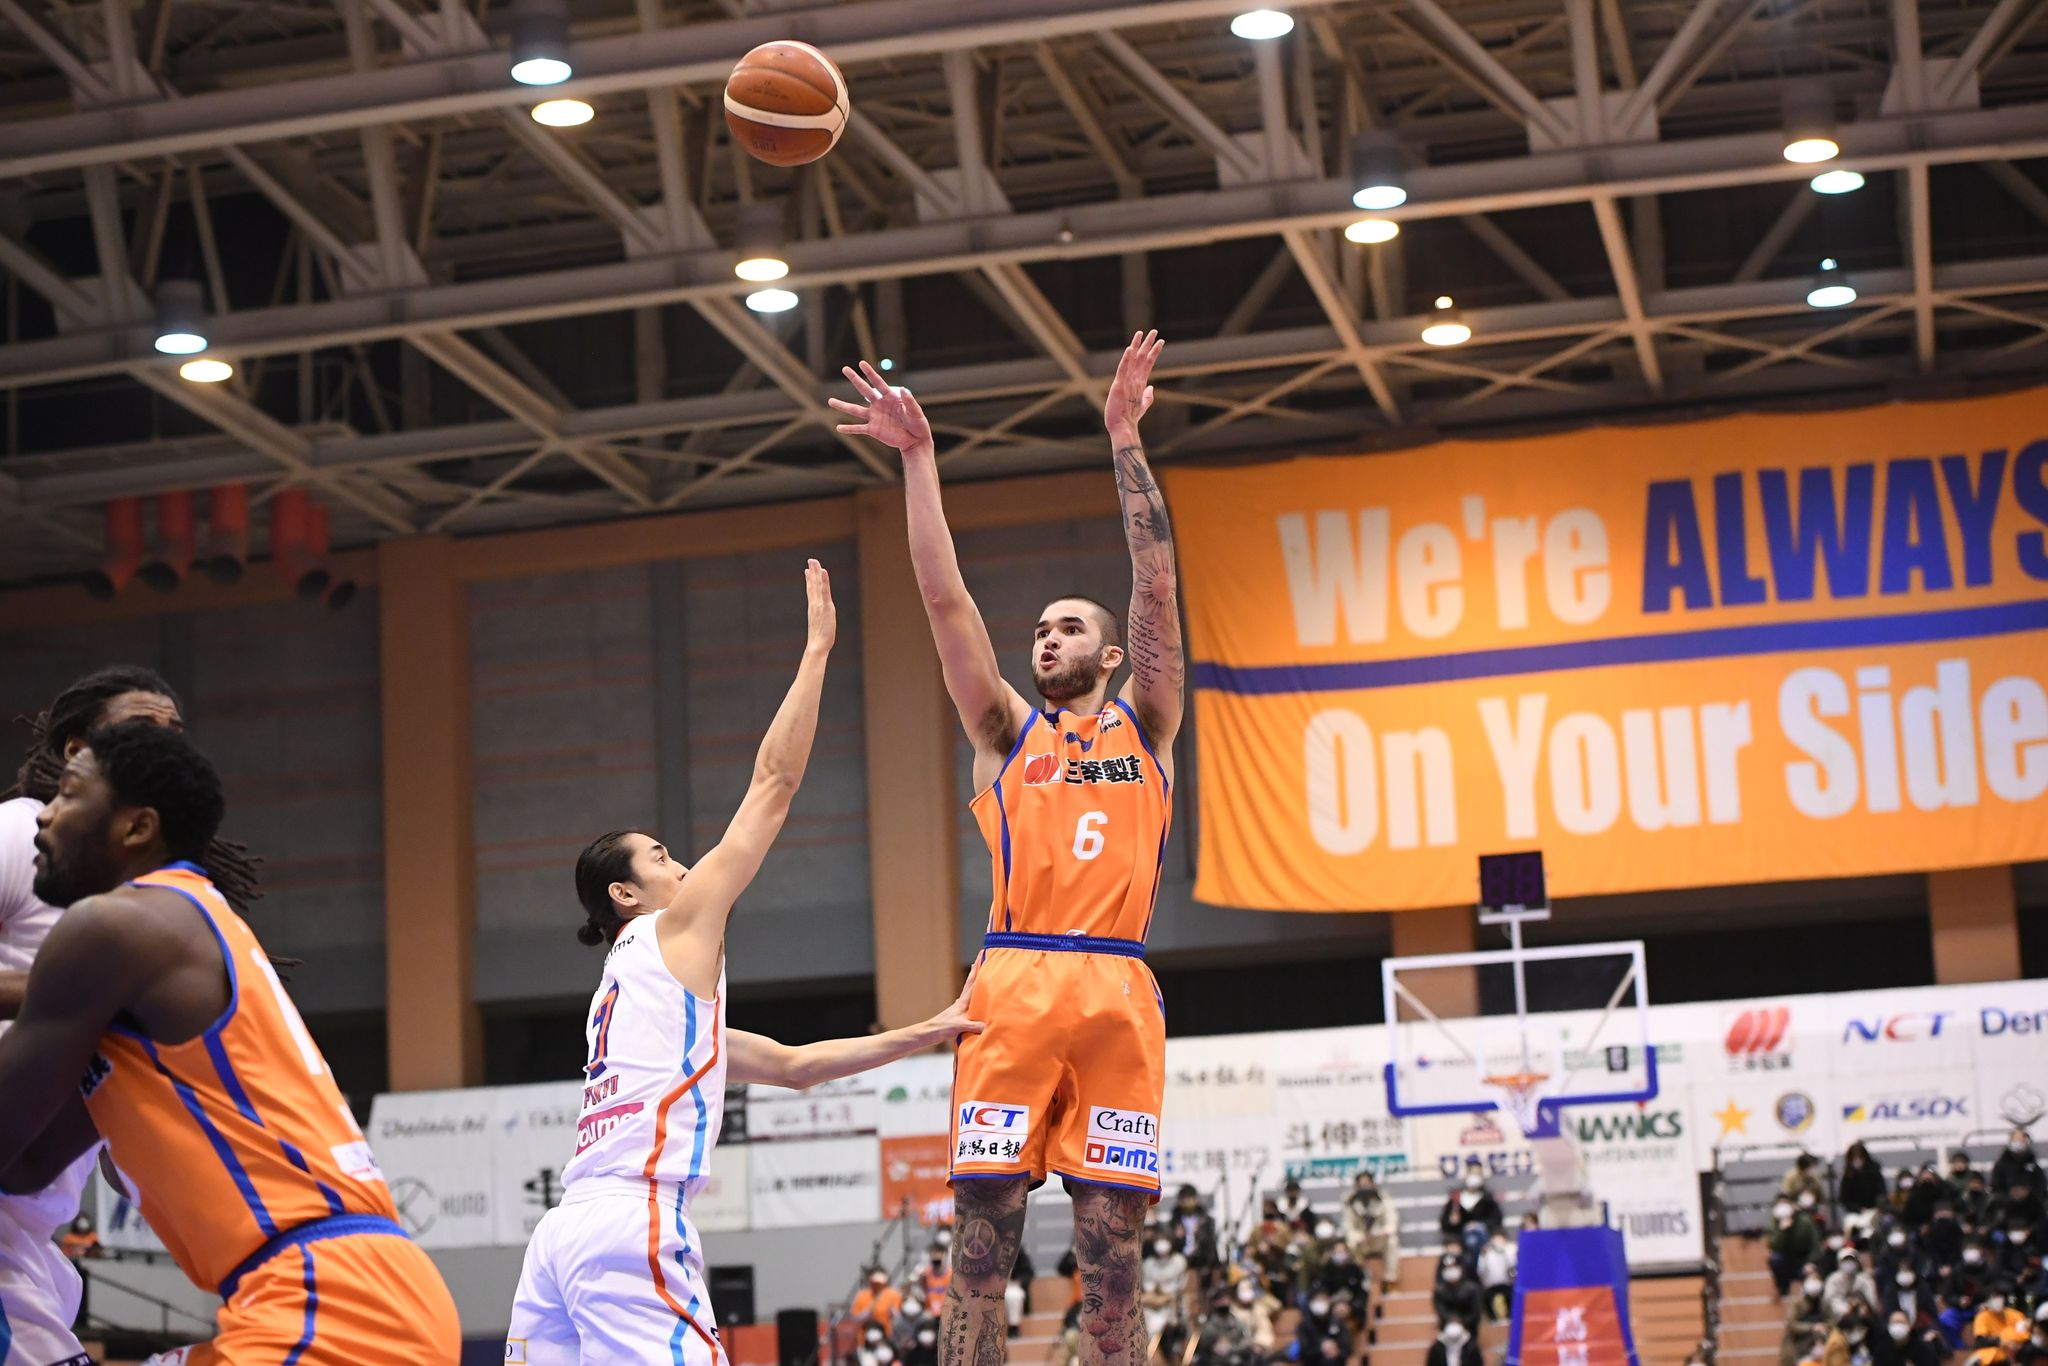 2021-22-B.League-Hiroshima-vs-Niigata-Kobe-Paras-2 Ramos faces Schafer in B.League; Sotto looks to step up for Humphries in NBL Basketball News  - philippine sports news